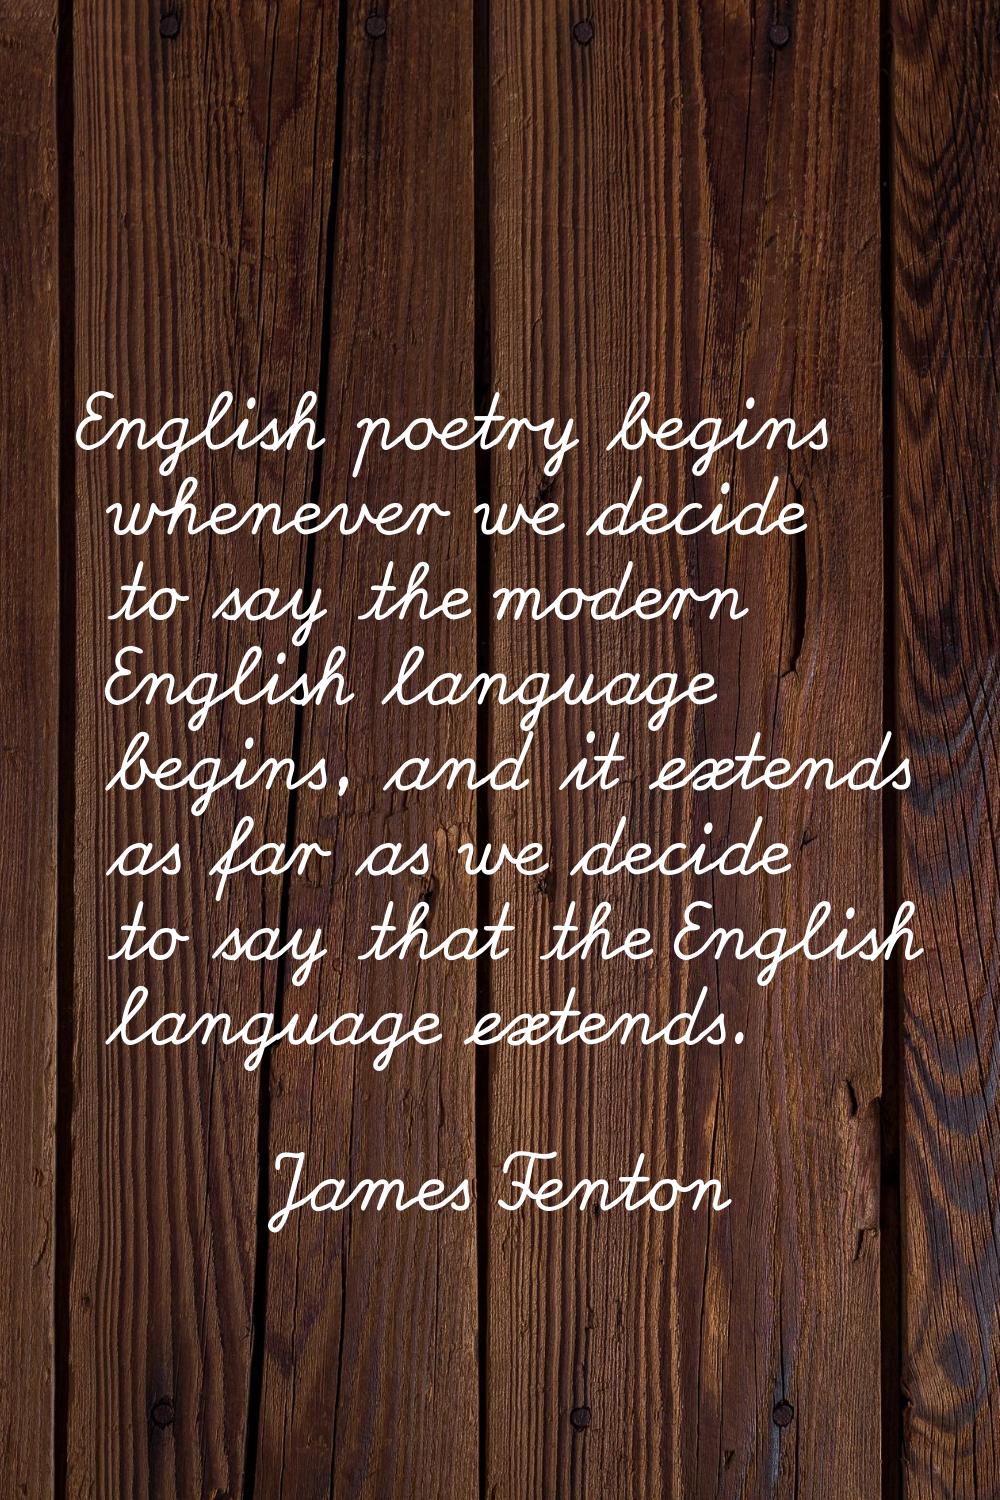 English poetry begins whenever we decide to say the modern English language begins, and it extends 